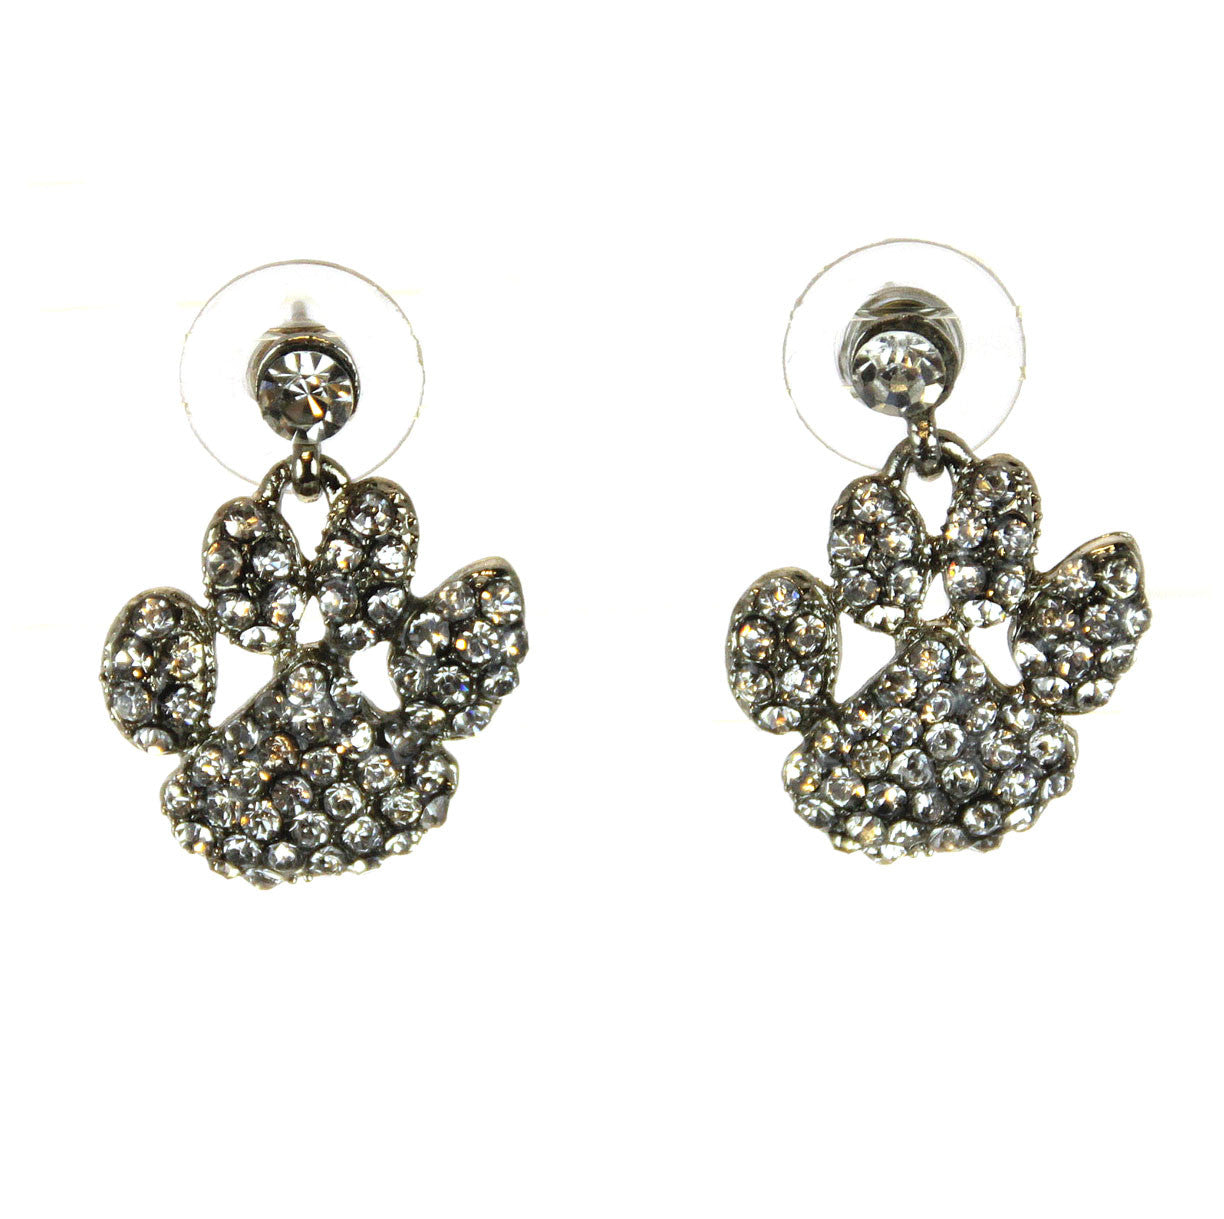 Tiger Paws Earrings Pave Crystals